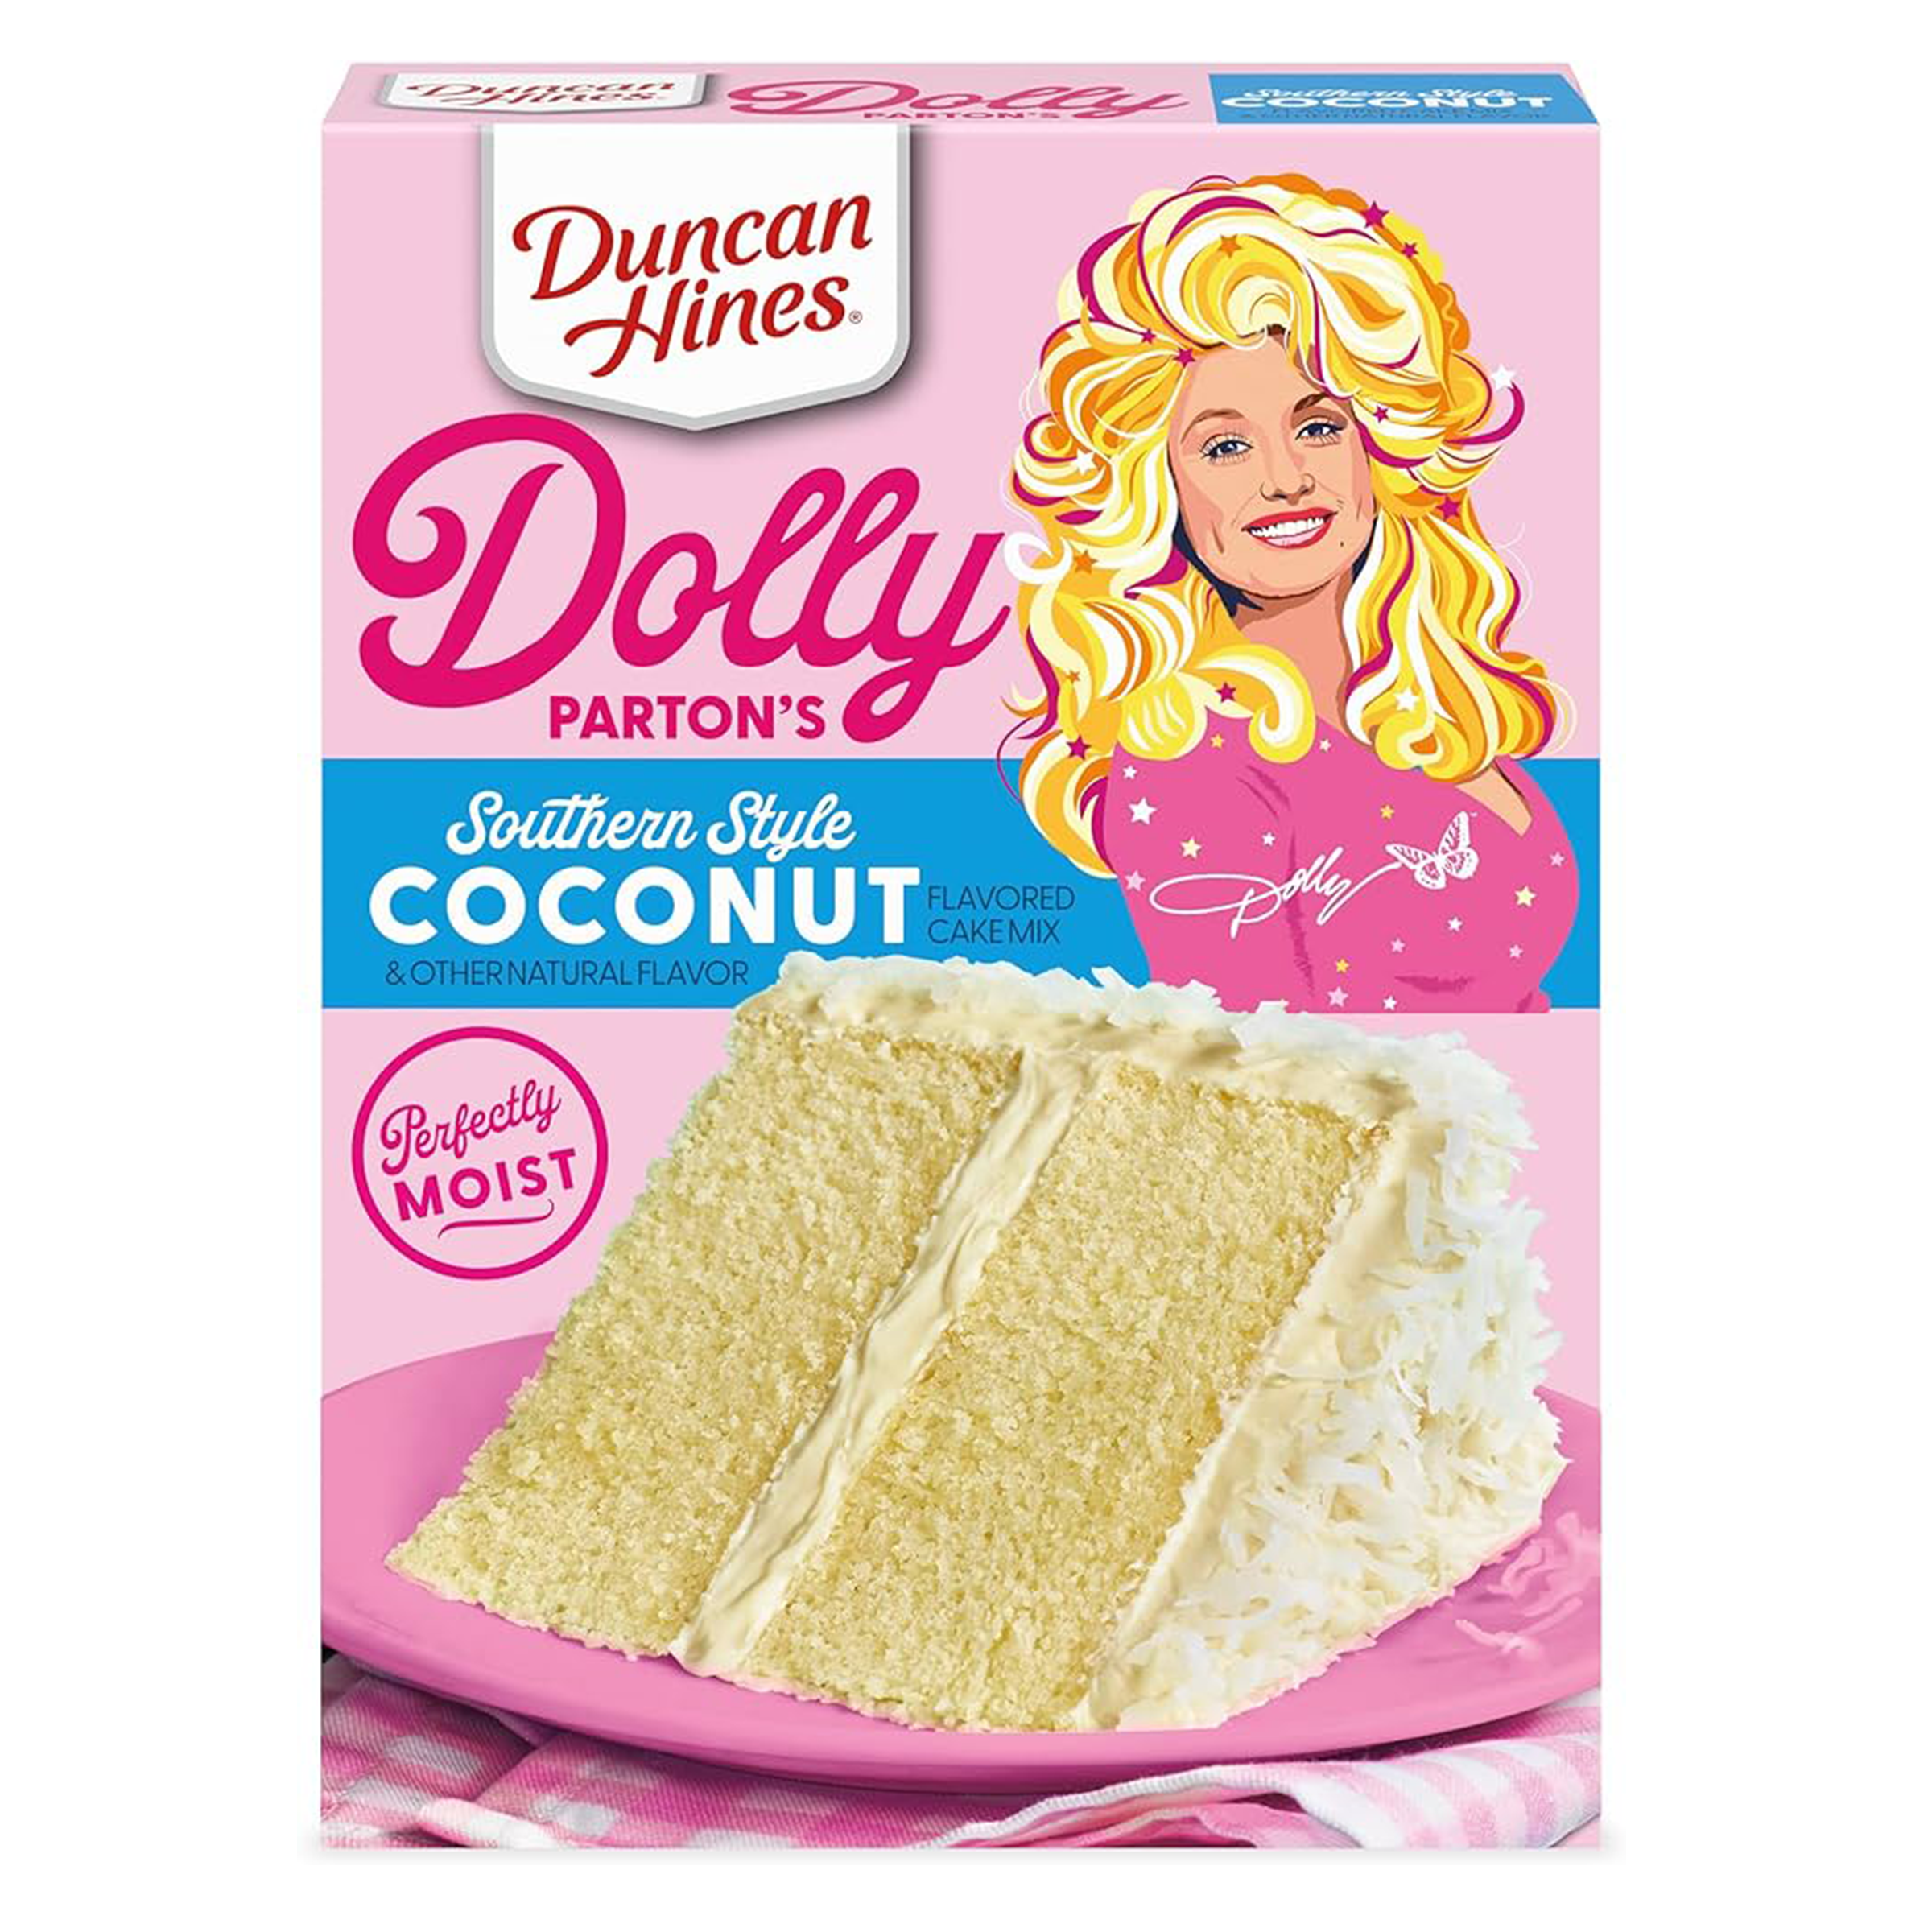 Dolly Parton’s - Southern Style Coconut